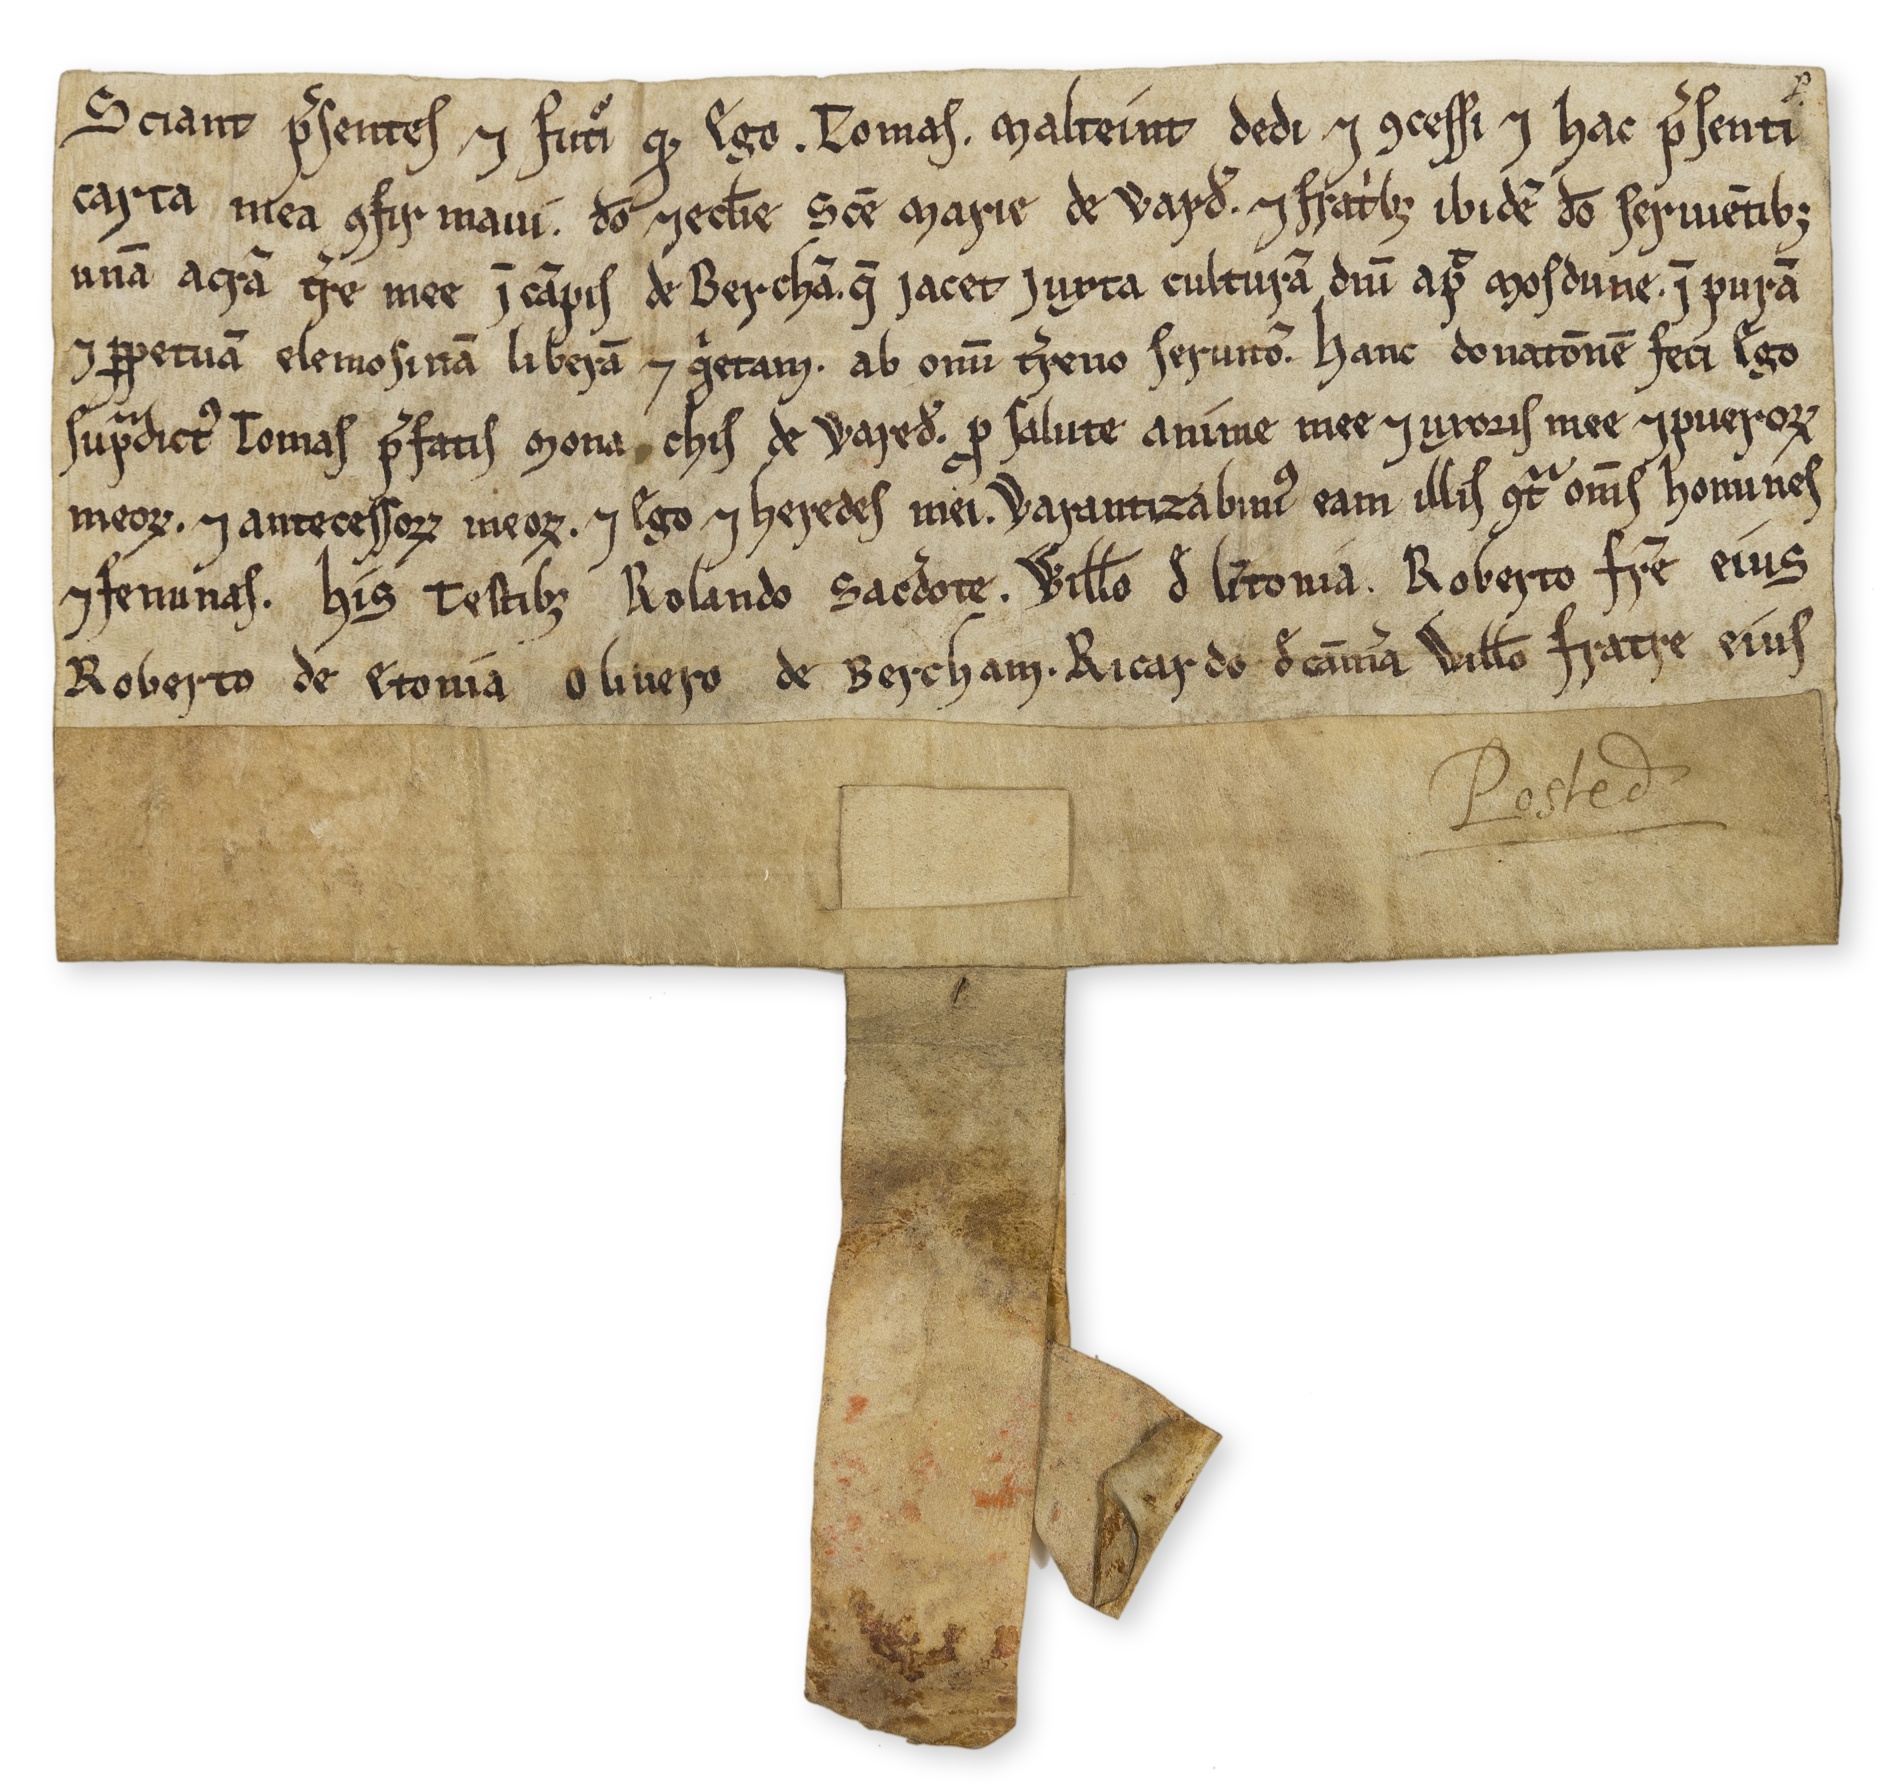 Bedfordshire, Old Warden.- Charter, grant by Thomas Malteint to St. Mary's of Warden [Warden …